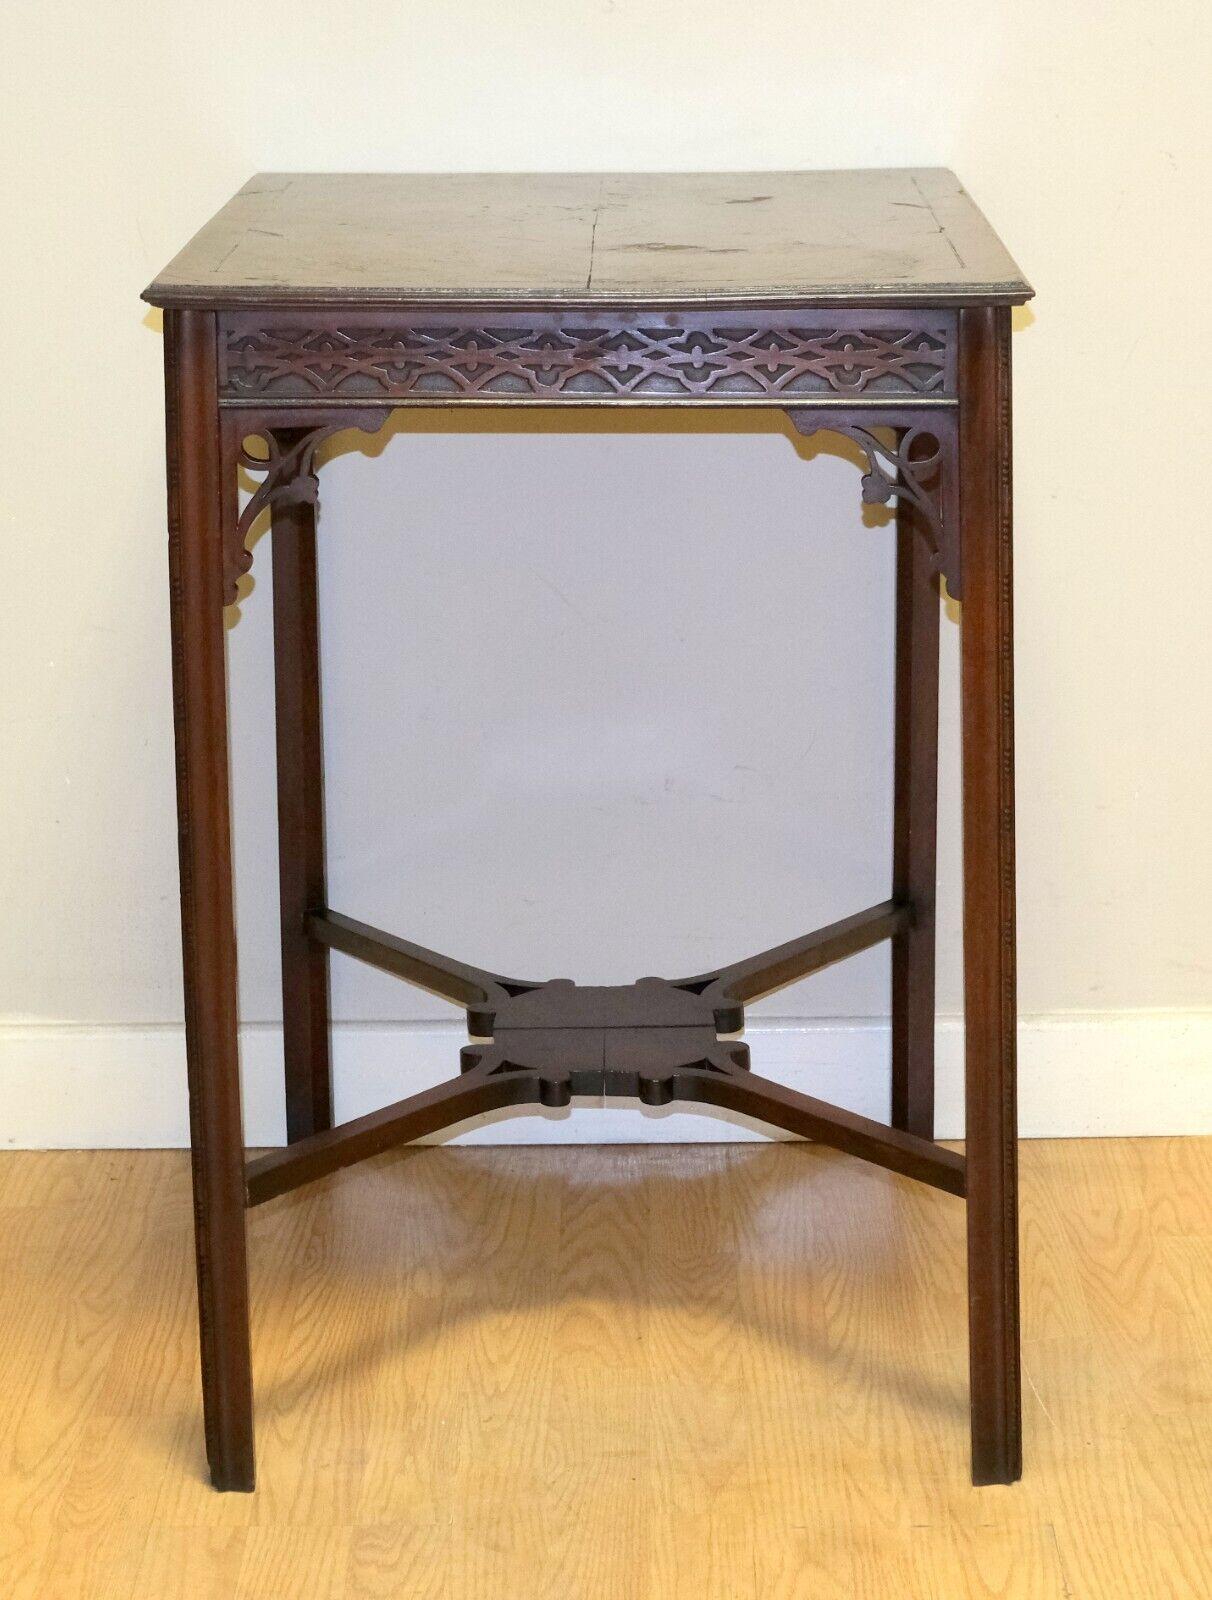 Hand-Crafted LOVELY ANTIQUE EDWARDIAN HARDWOOD SiDE TABLE STRAIGHT LEGS & CARVING For Sale